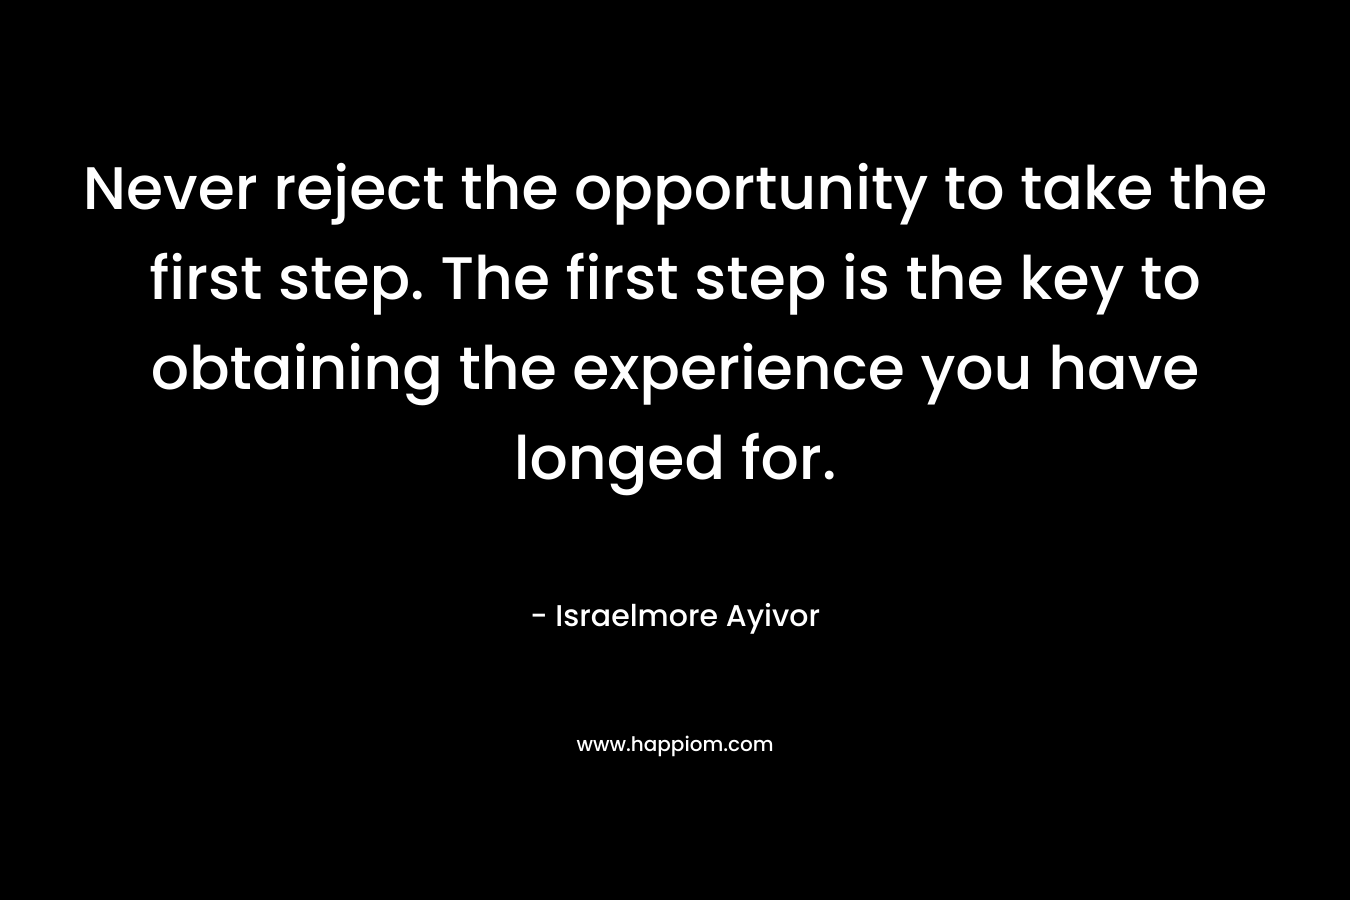 Never reject the opportunity to take the first step. The first step is the key to obtaining the experience you have longed for. – Israelmore Ayivor